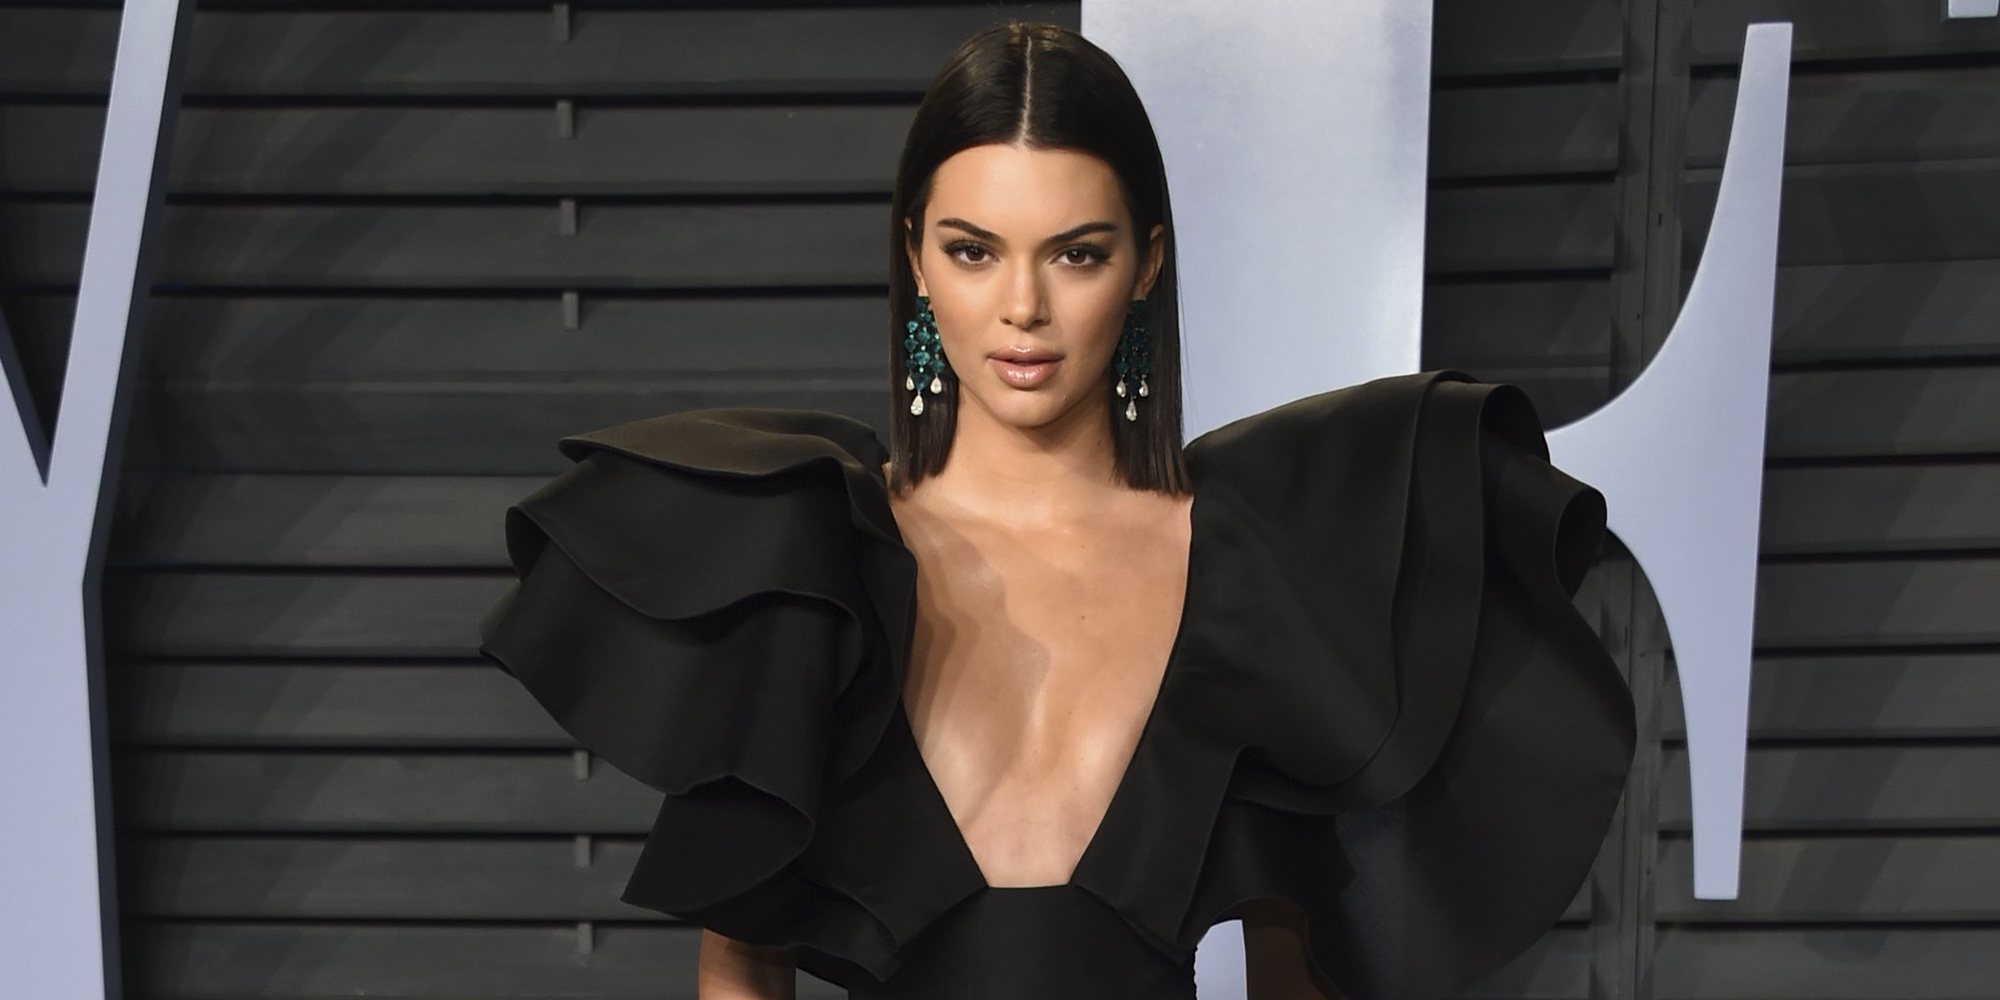 Kendall Jenner responde a los rumores: "No soy lesbiana"